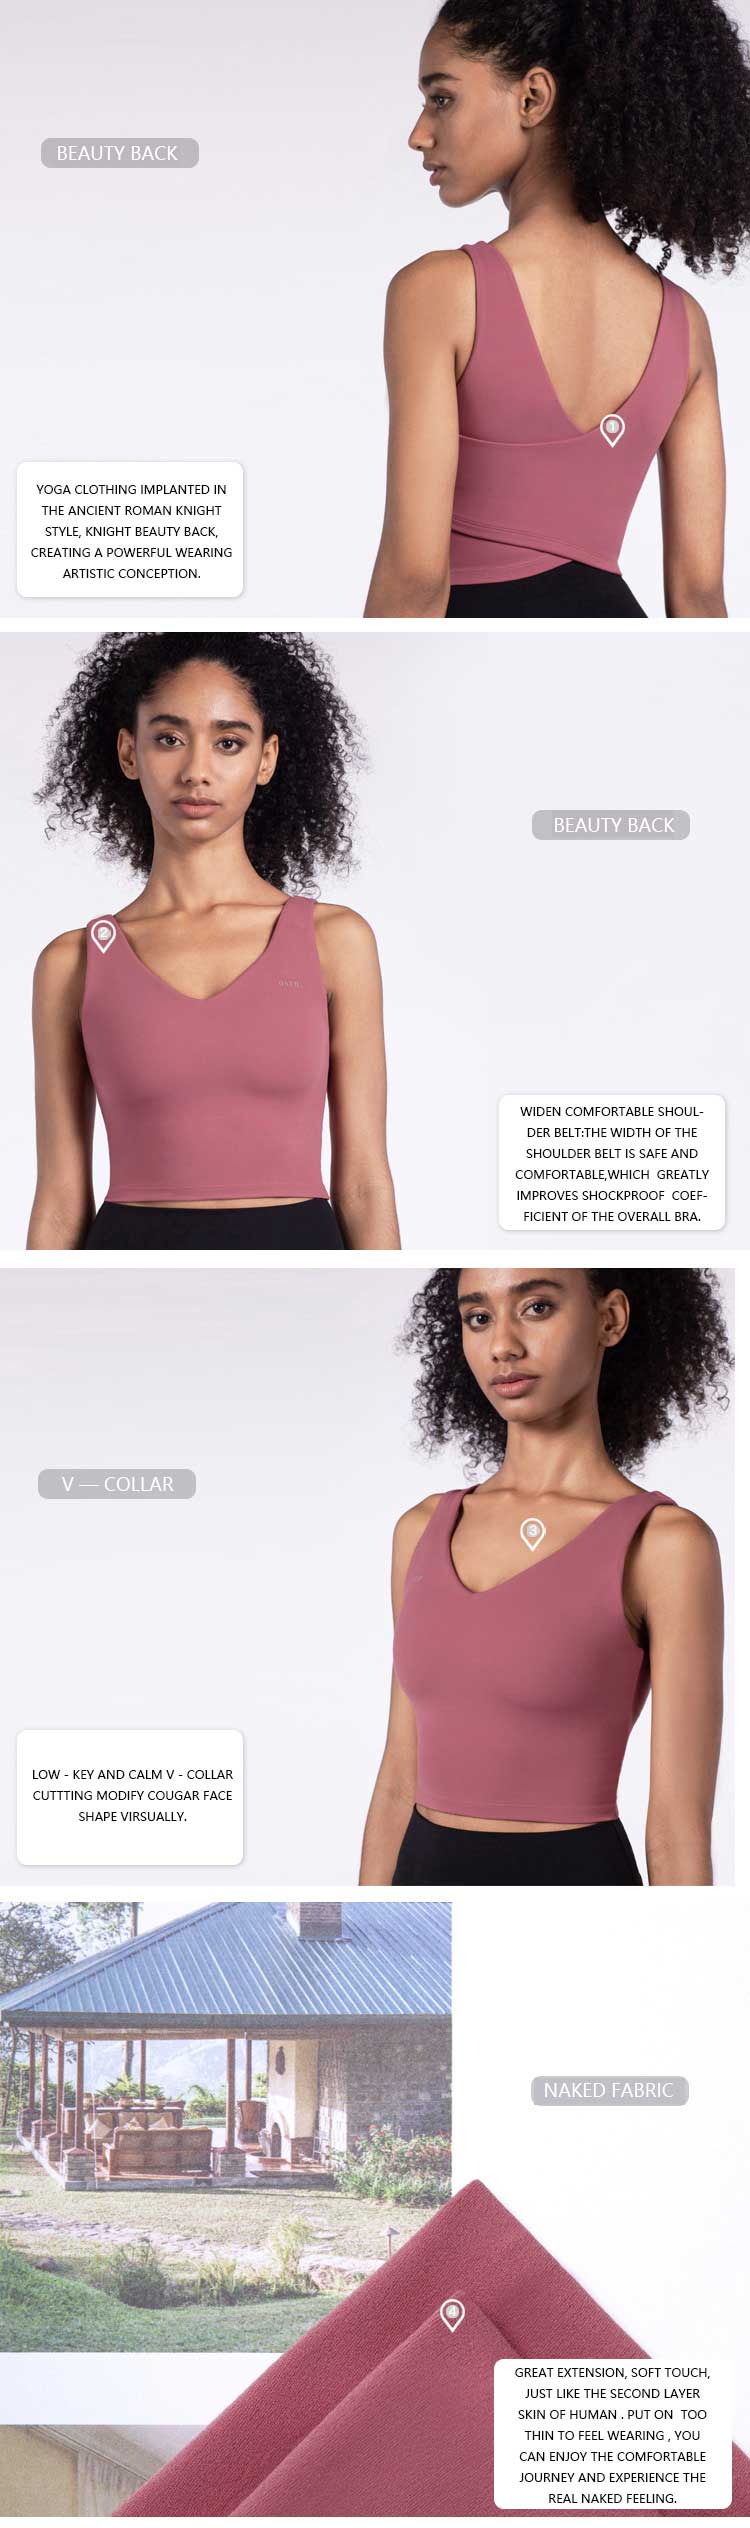 Supportive crop tops it is a sports bra with new height of fashion, yoga clothing implanted in the ancient Roman knight style